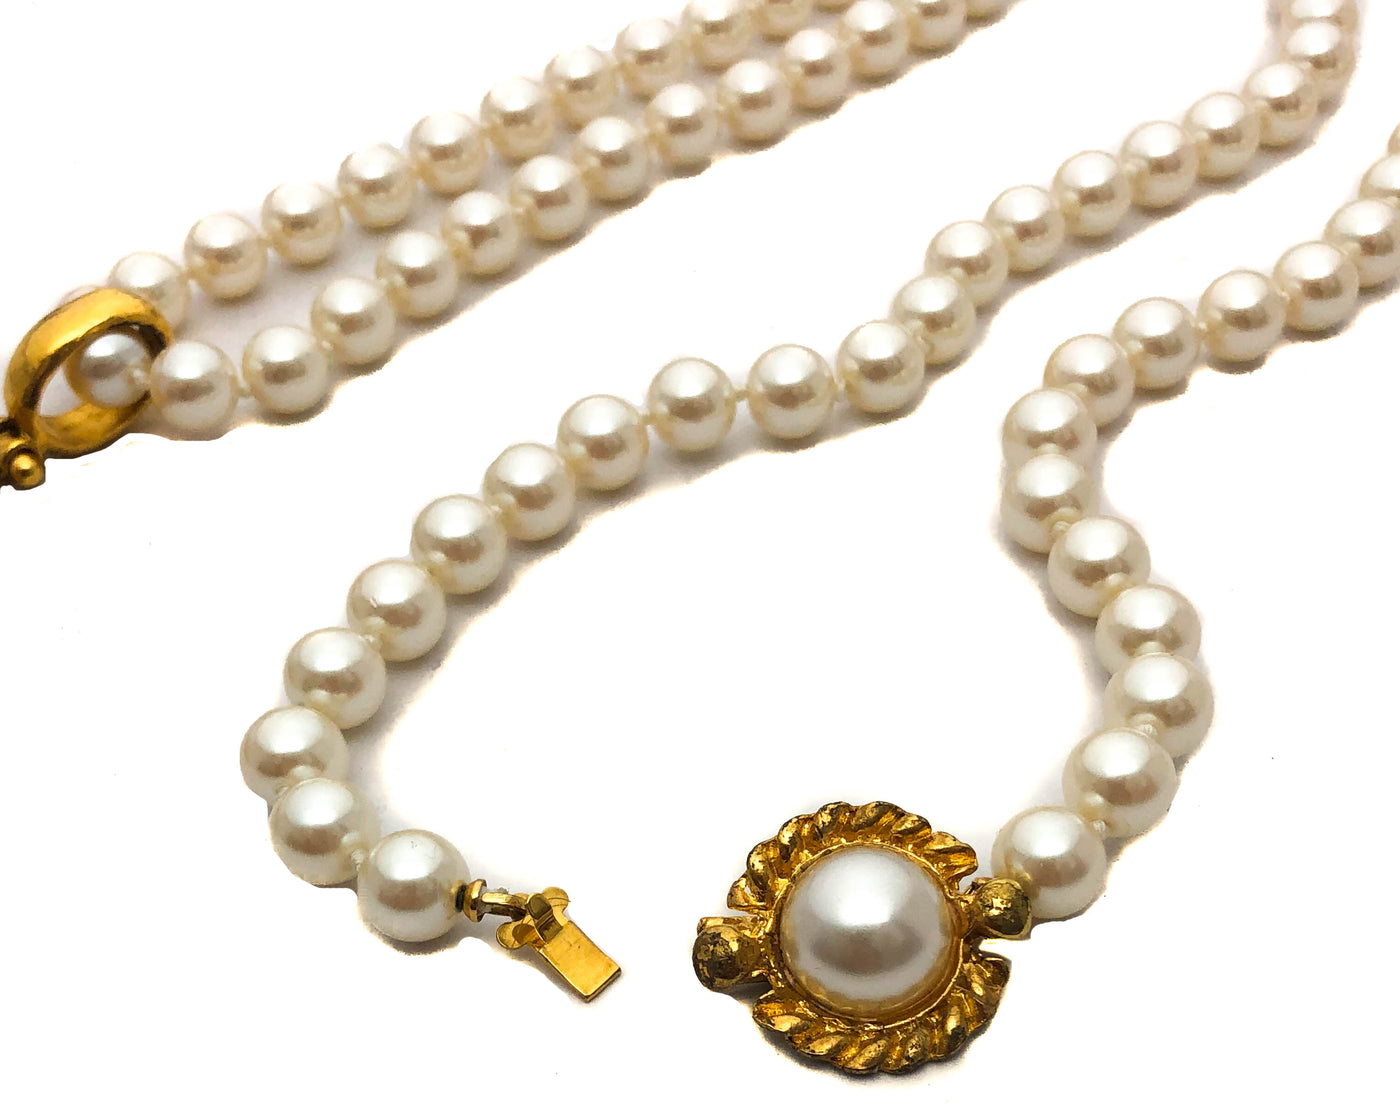 Chanel Vintage Pearl & Large Cross Iconic Pendant Necklace